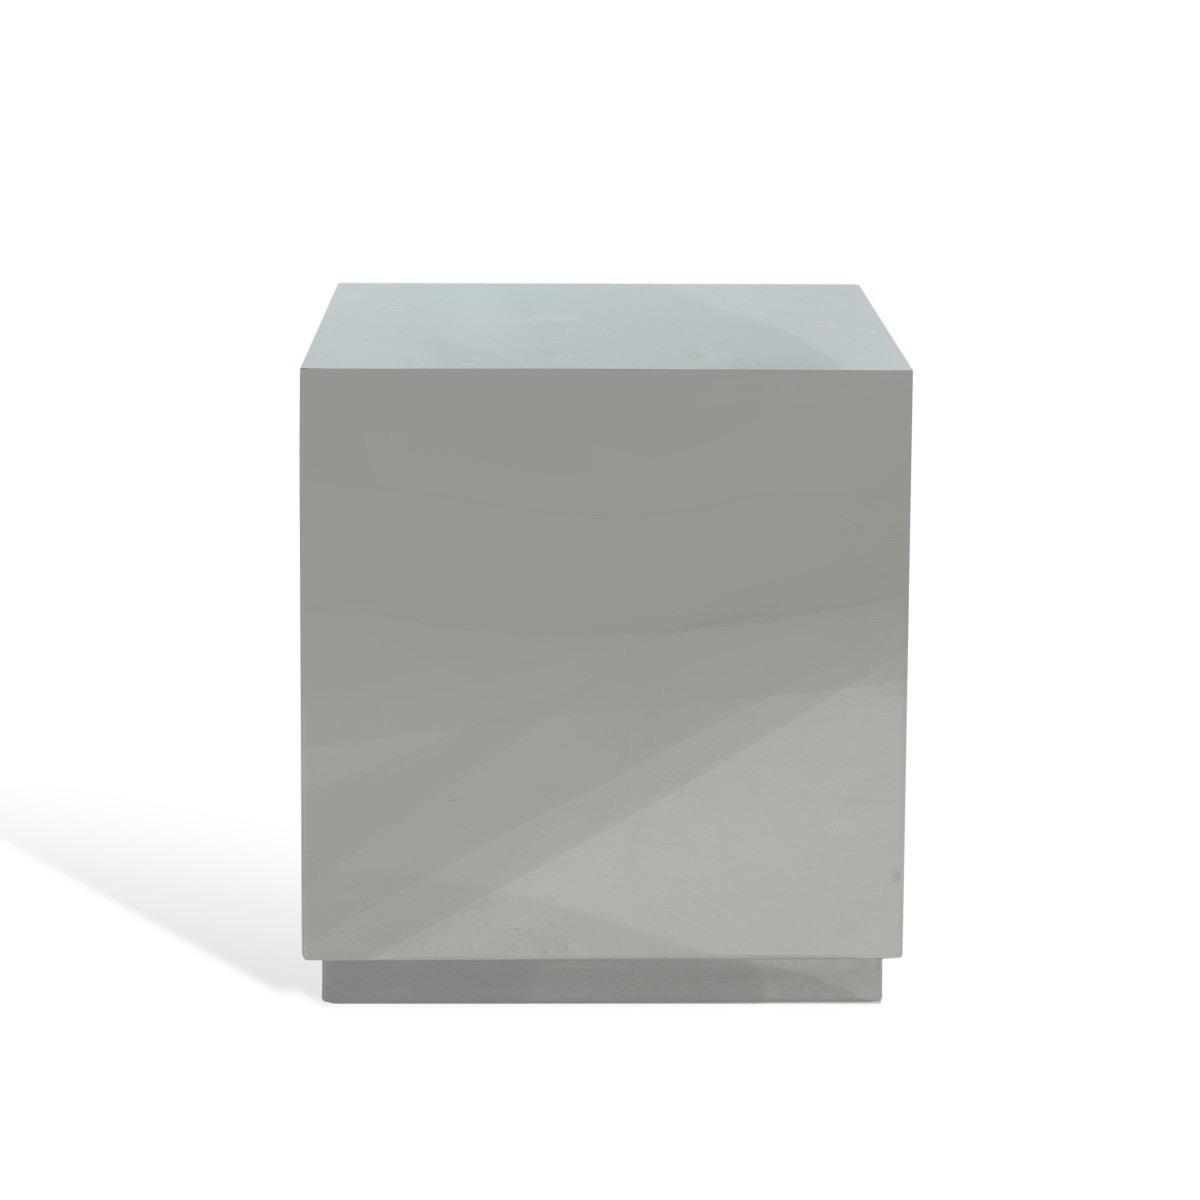 A perfect cube table in stainless steel. 

Dimensions: 17